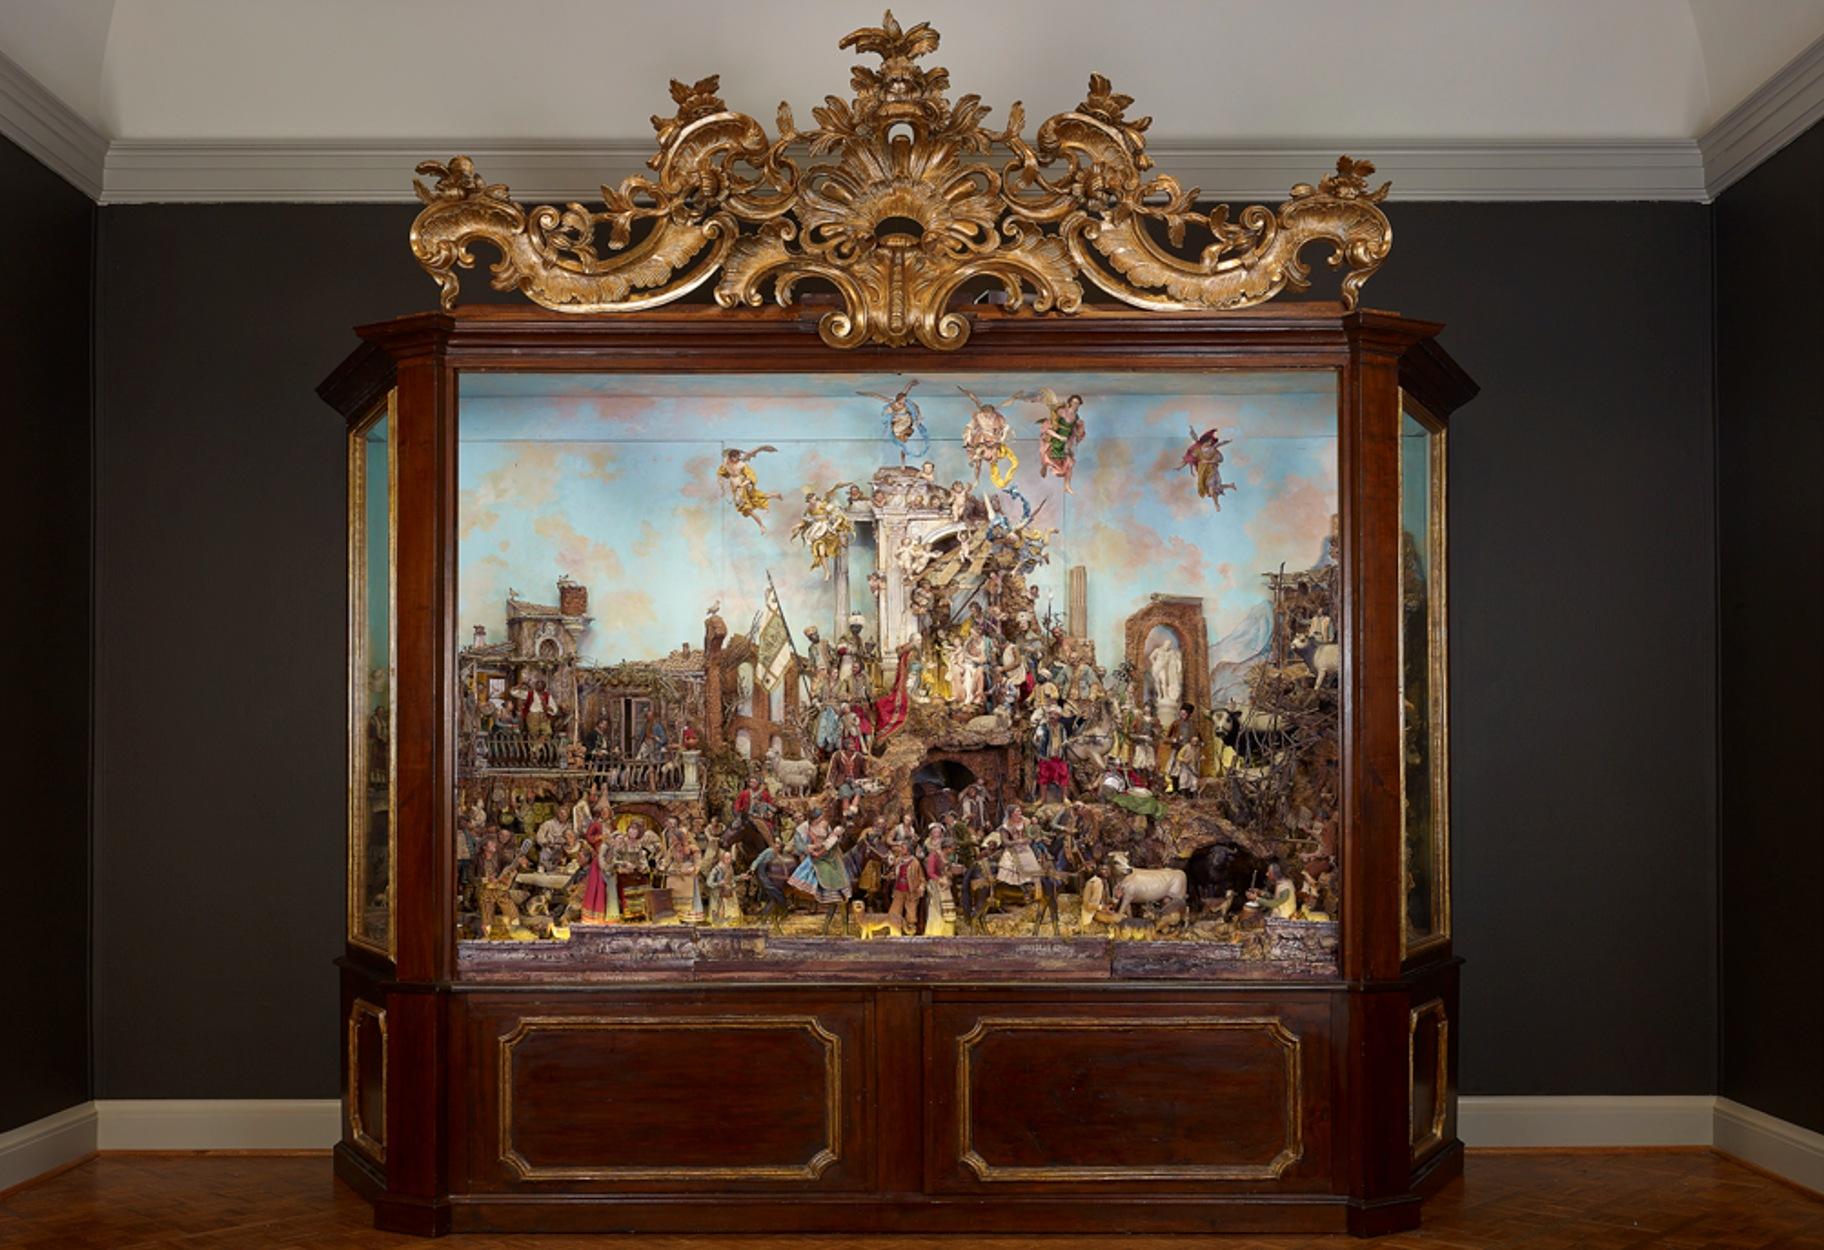 The Neapolitan crèche at the Art Institute of Chicago. (Courtesy of the Art Institute of Chicago)